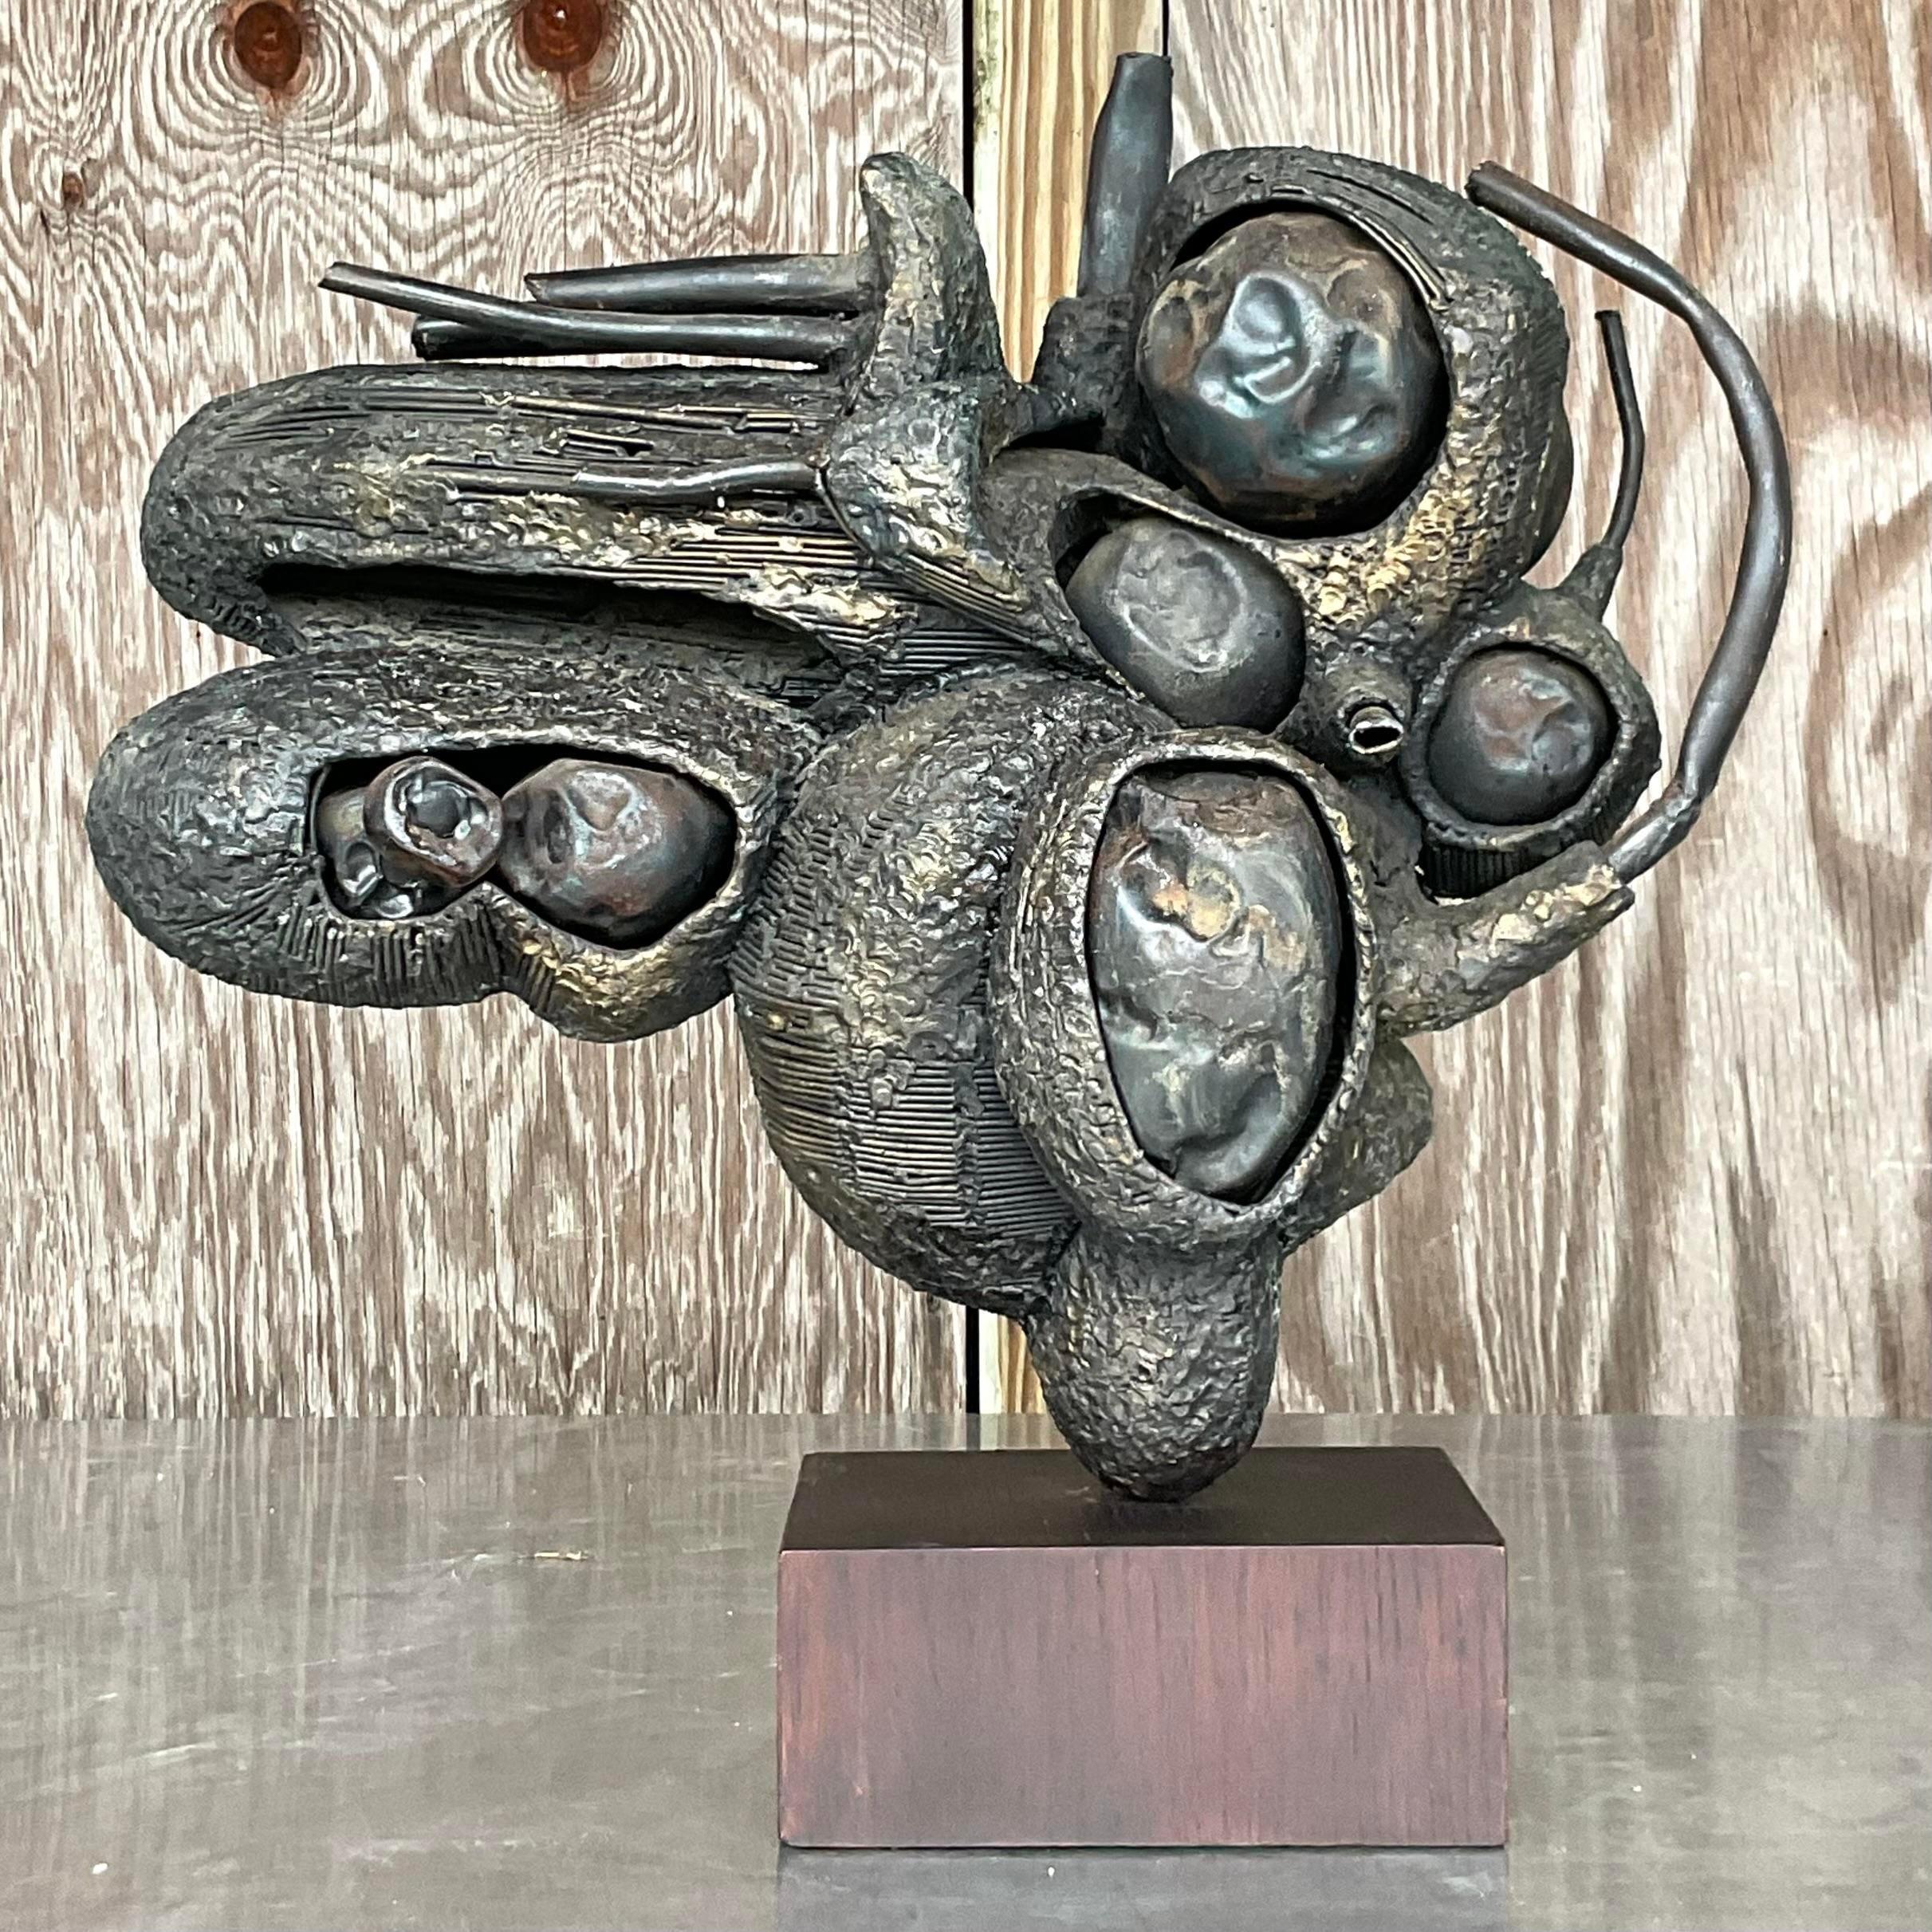 A fabulous vintage Boho sculpture. Made by the artist Rudolph Seno. A chic bronze abstract composition with a beautiful patina from time. Rests on a black wood plinth. Acquired from a Palm Beach estate.